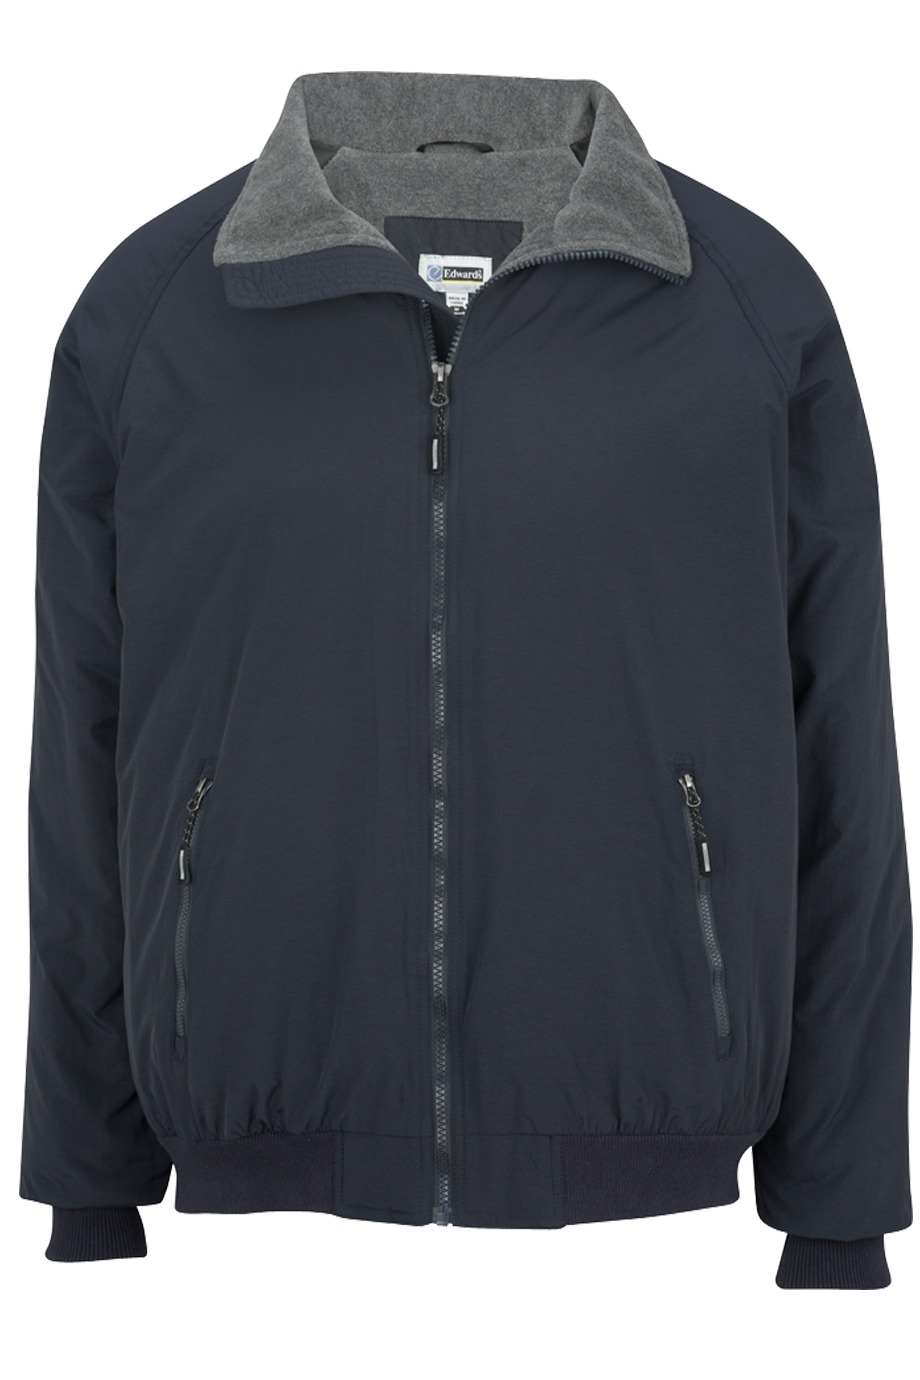 click to view NAVY w/CHARCOAL HEATHER FLEECE